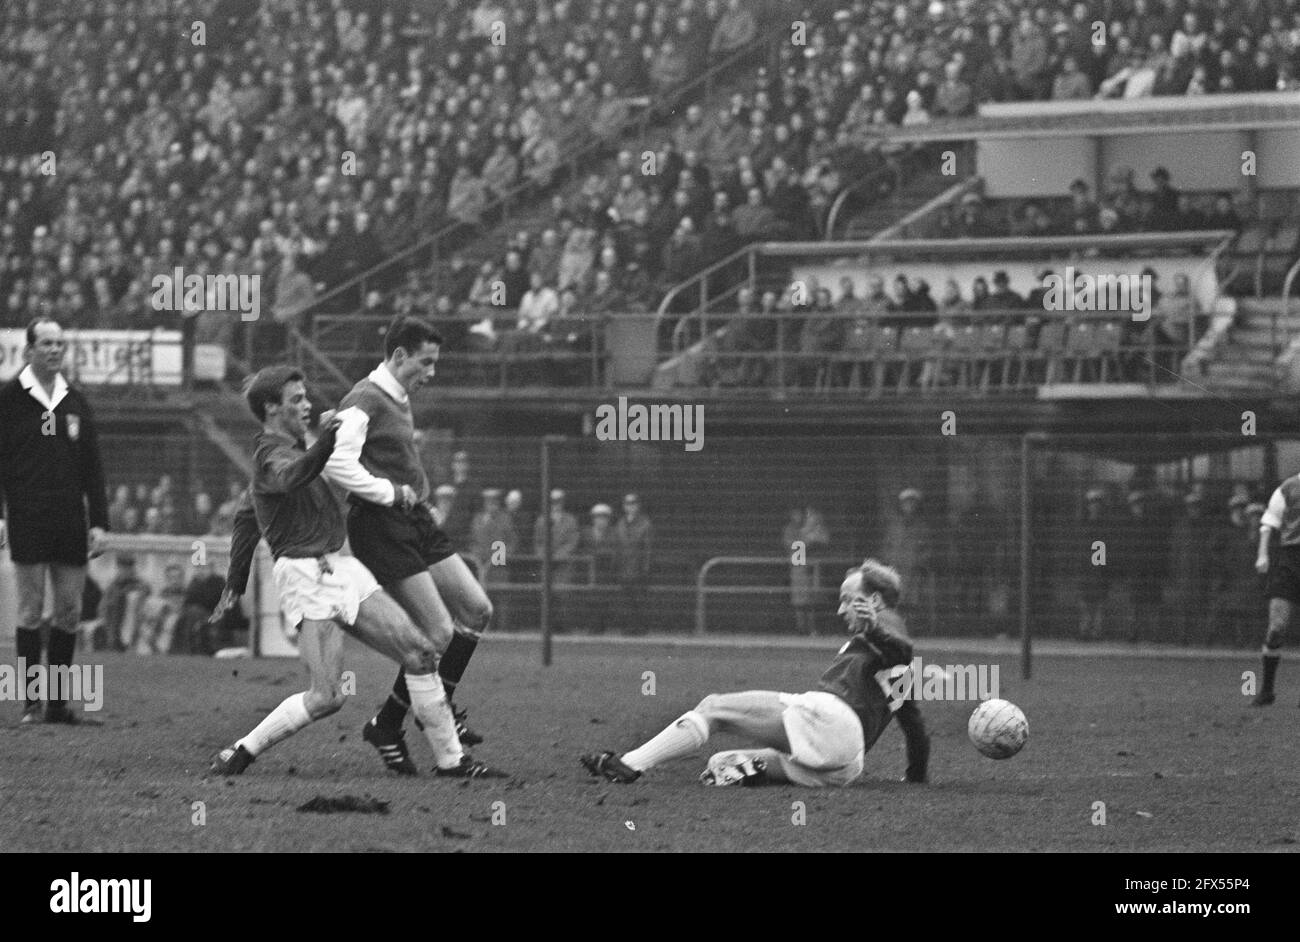 Feyenoord v NEC 2-0. Game moments, January 7, 1968, sports, soccer, The Netherlands, 20th century press agency photo, news to remember, documentary, historic photography 1945-1990, visual stories, human history of the Twentieth Century, capturing moments in time Stock Photo